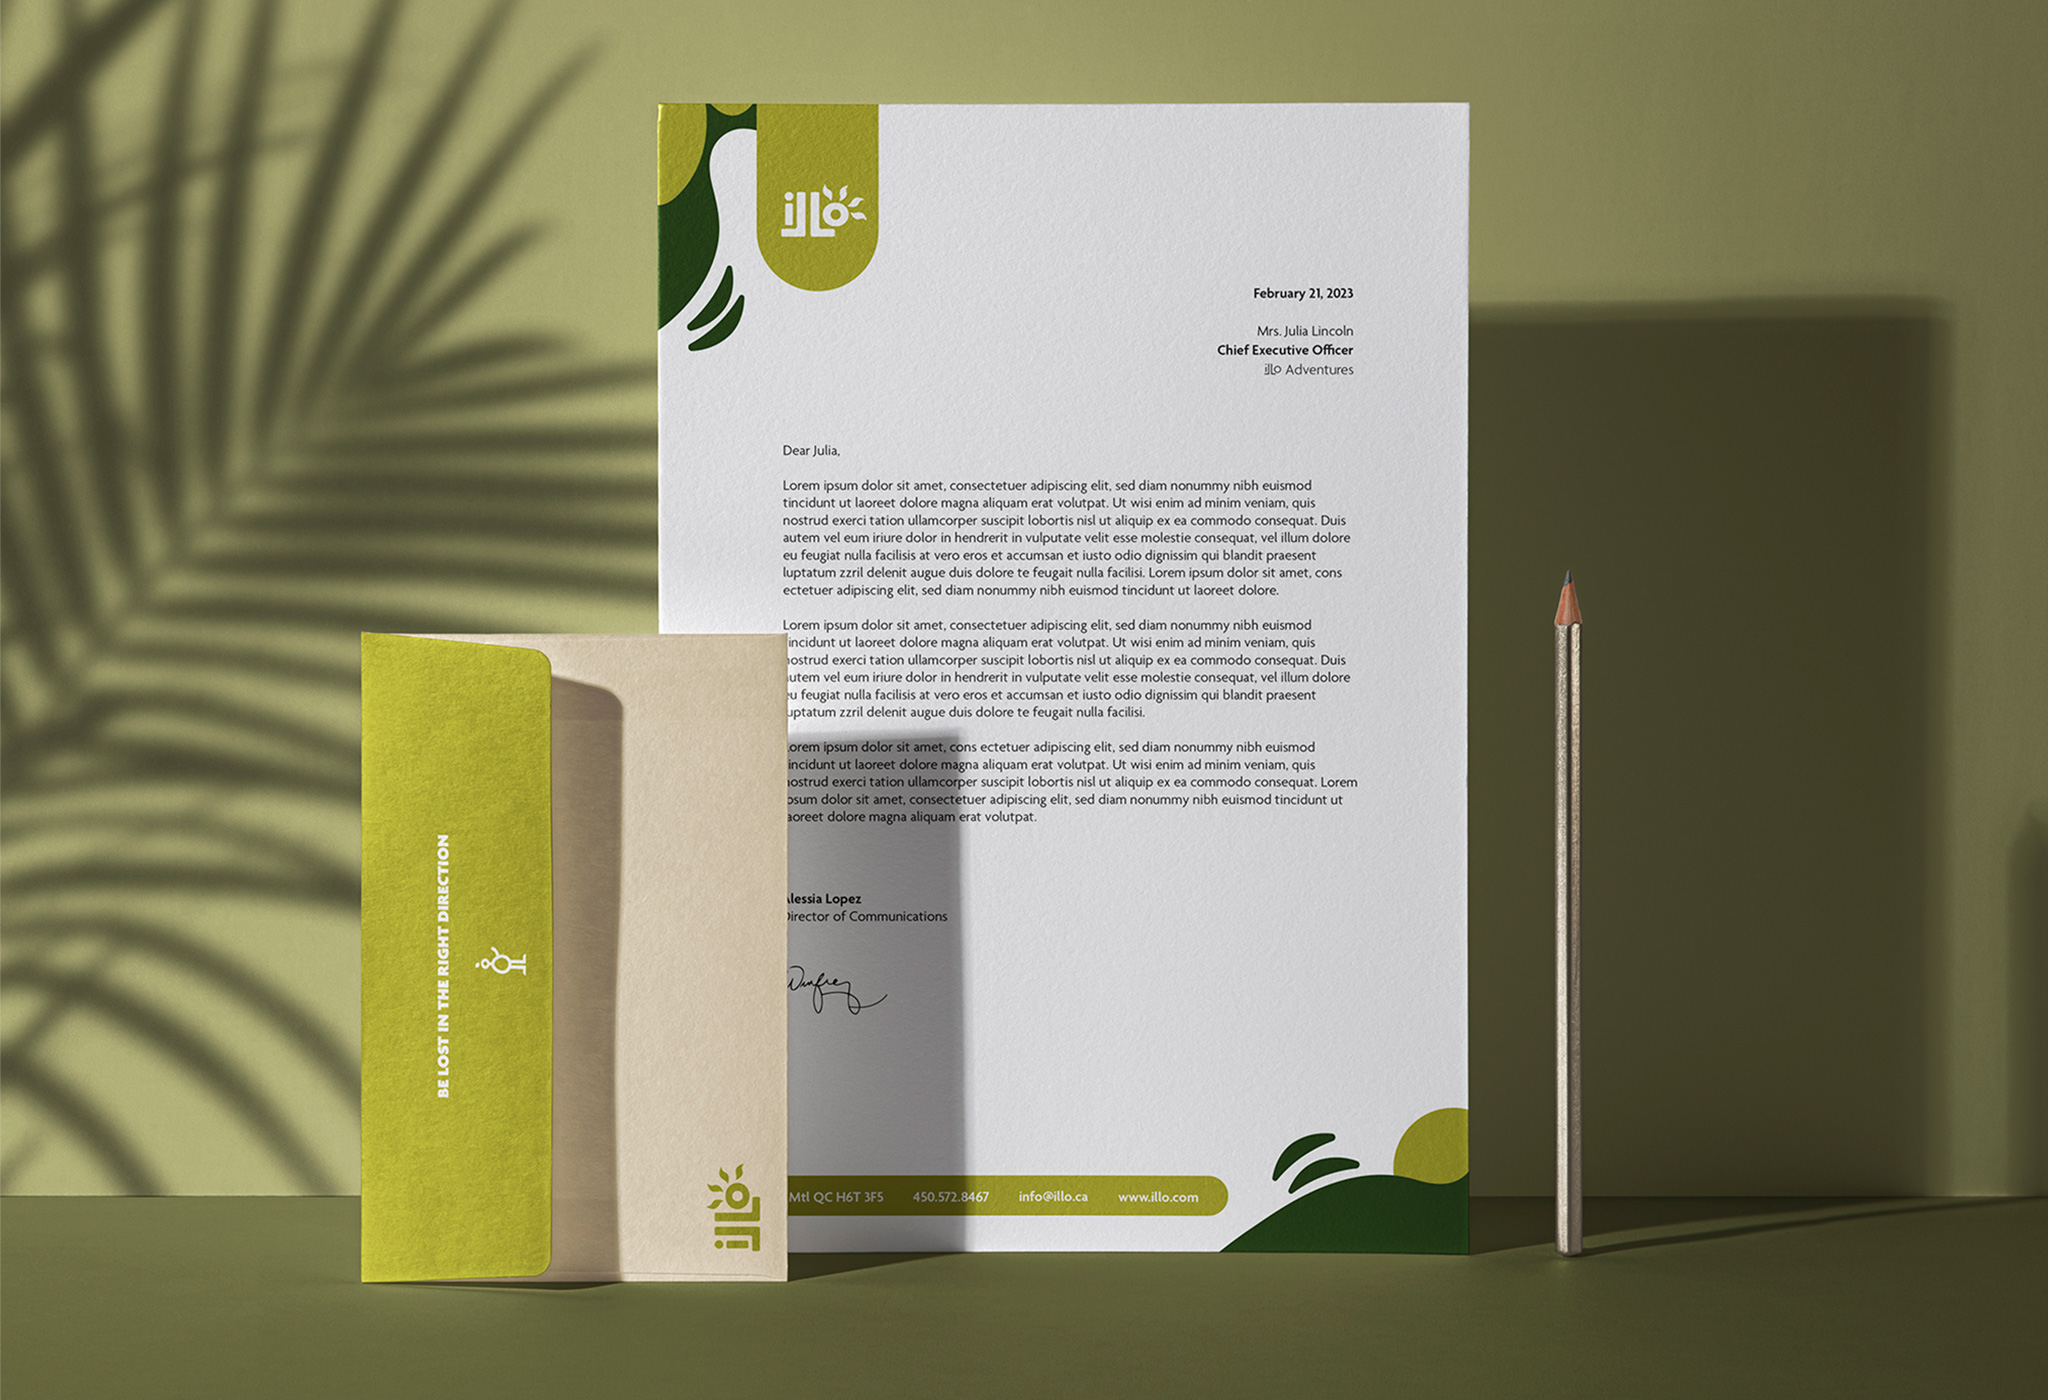 Mockup displaying a letterhead and envelope design for a hypothetical brand Illo Adventures. The design is characterized by a green and beige colour palette, along with dynamic shapes.